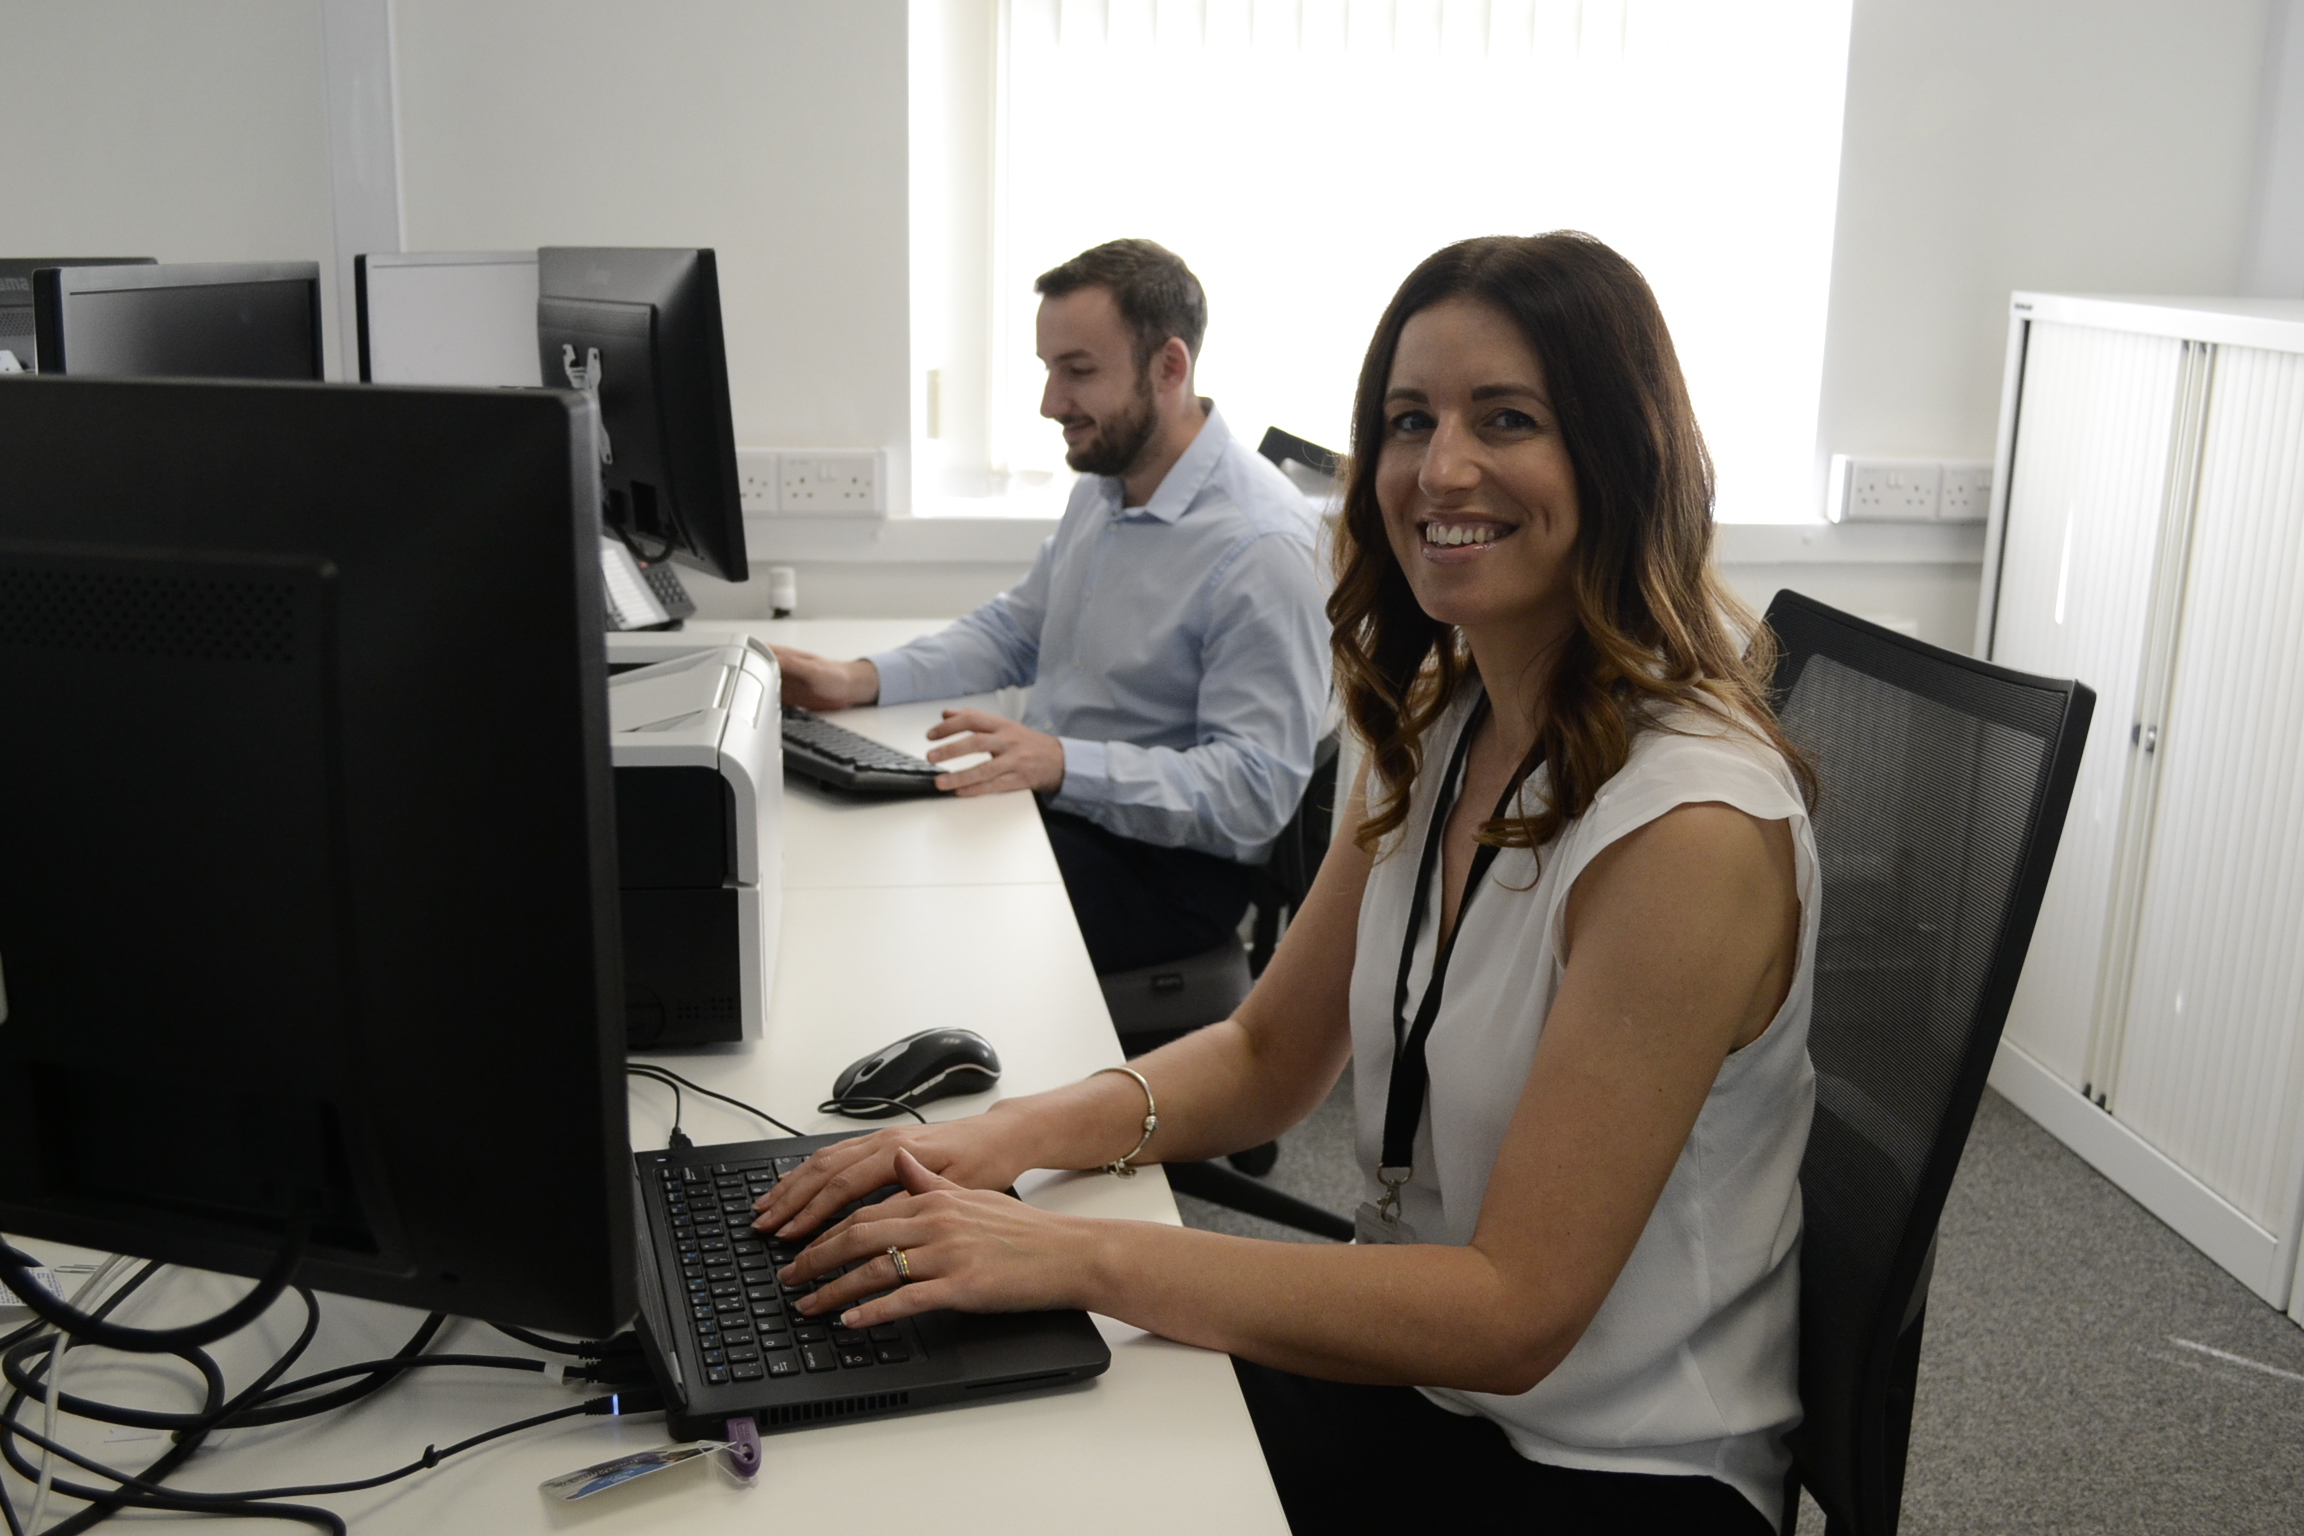 Female colleague on computer smiling and looking at camera